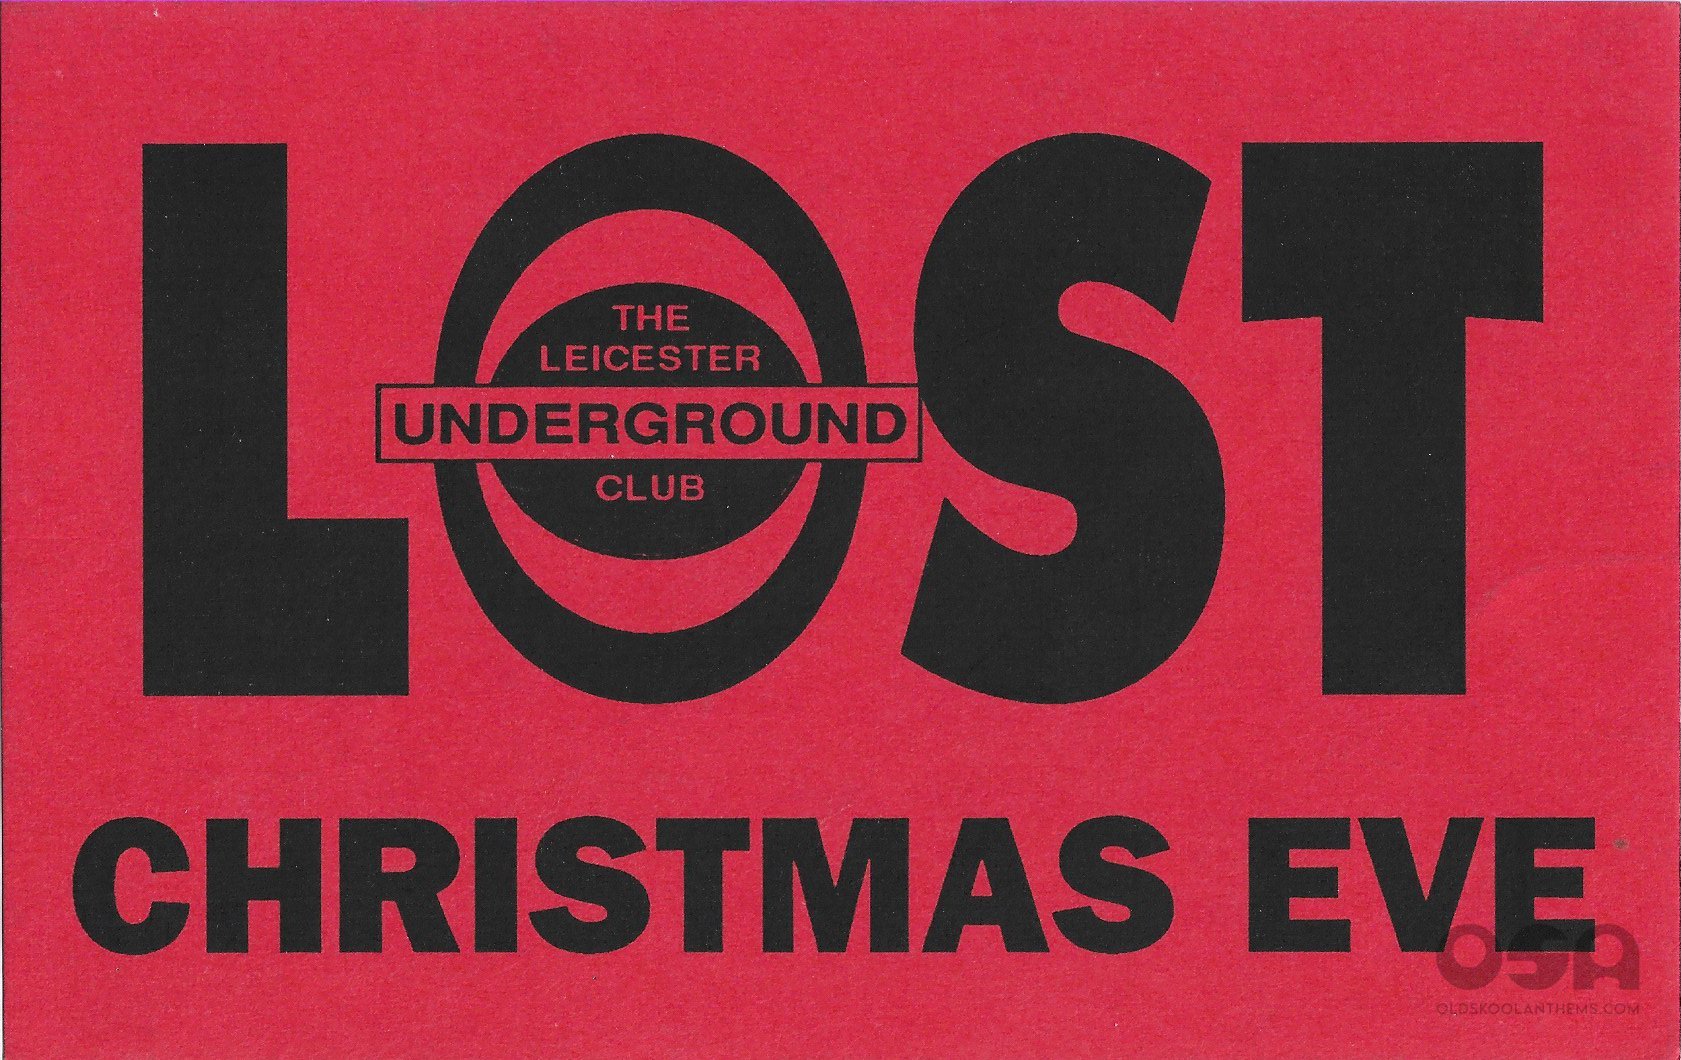 Lost @ The Leicester Underground Club - 24th December 1992 -A .jpg